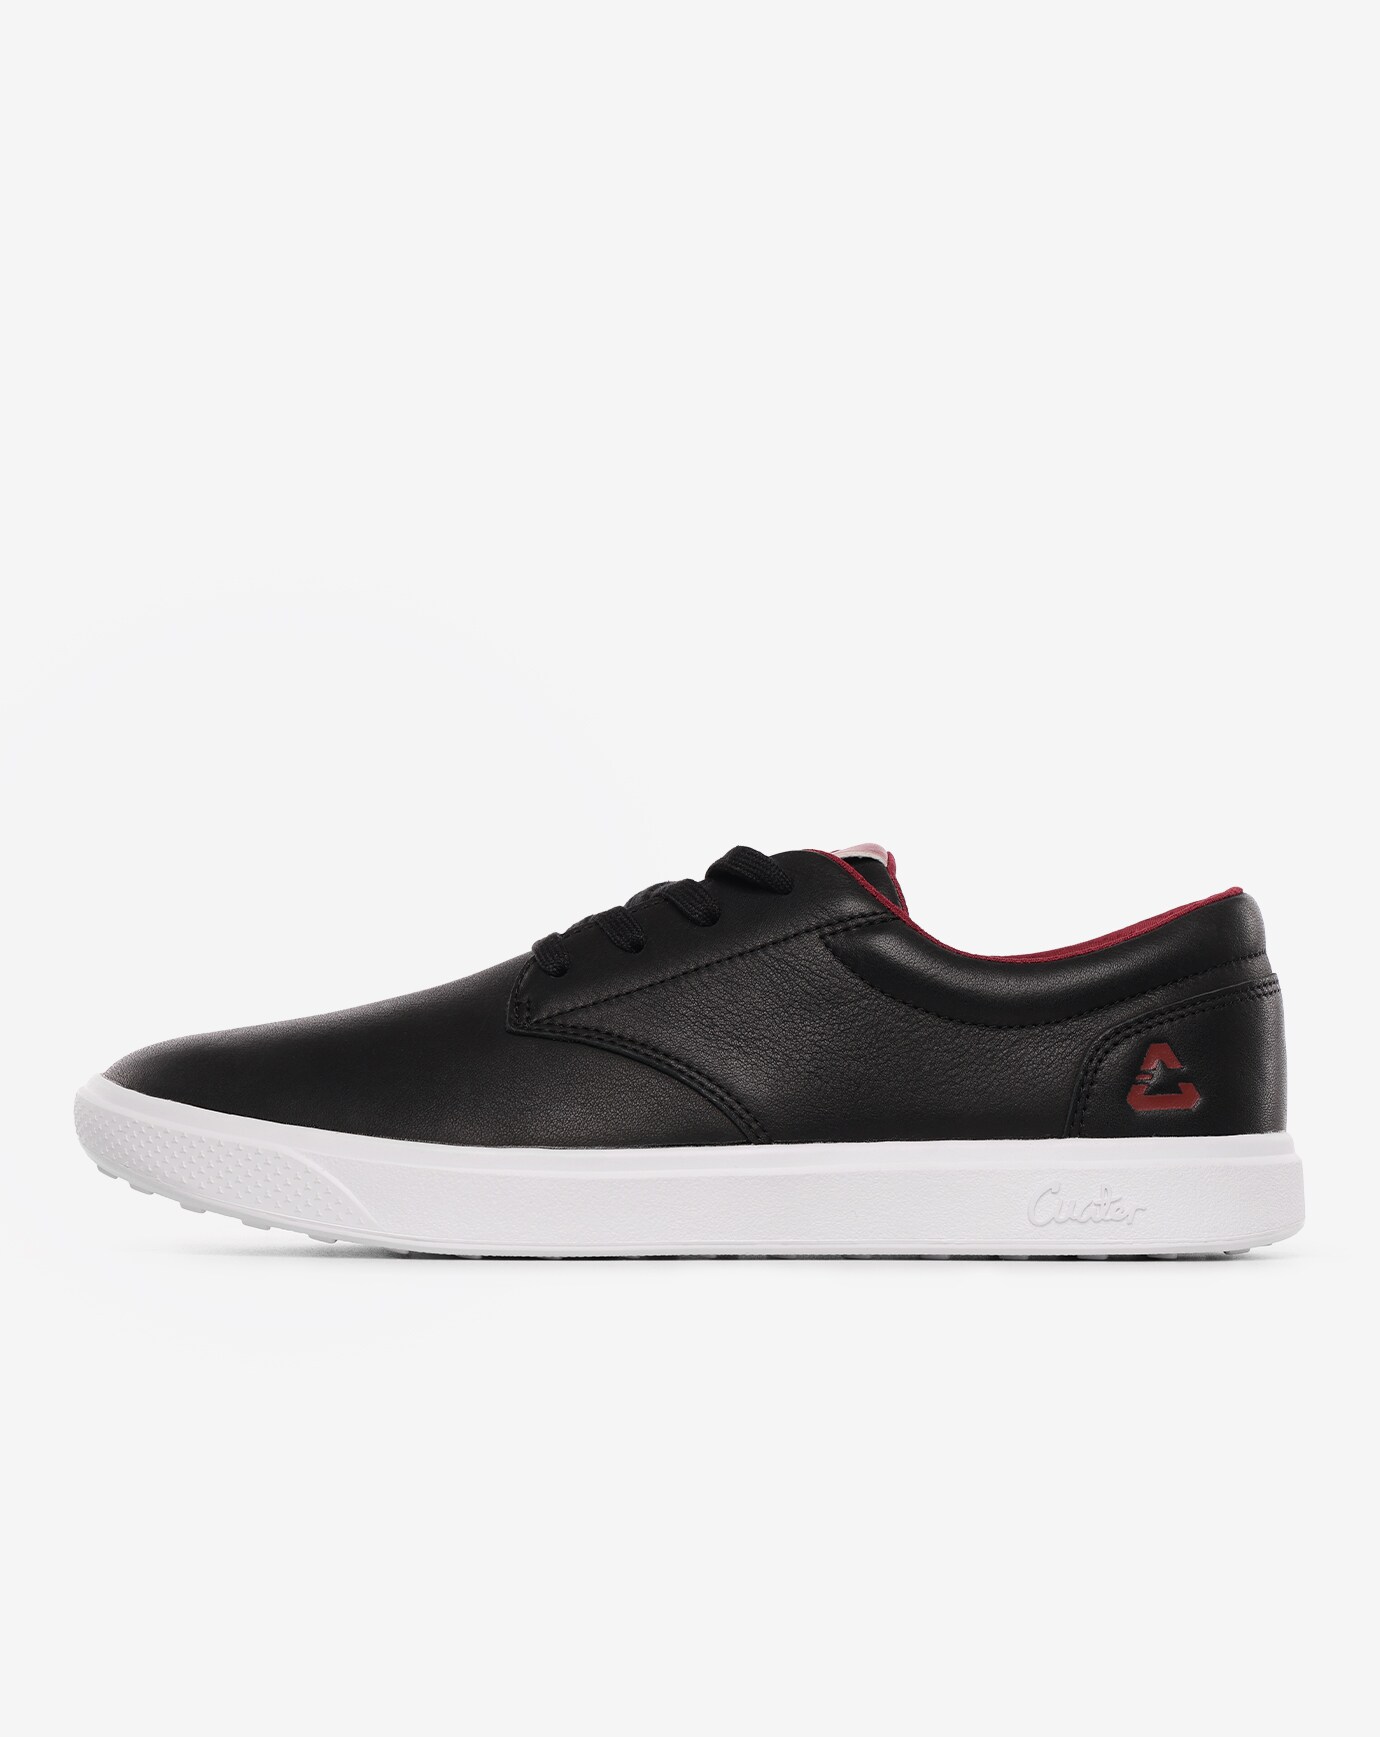 THE WILDCARD LEATHER SPIKELESS GOLF SHOE Image 1